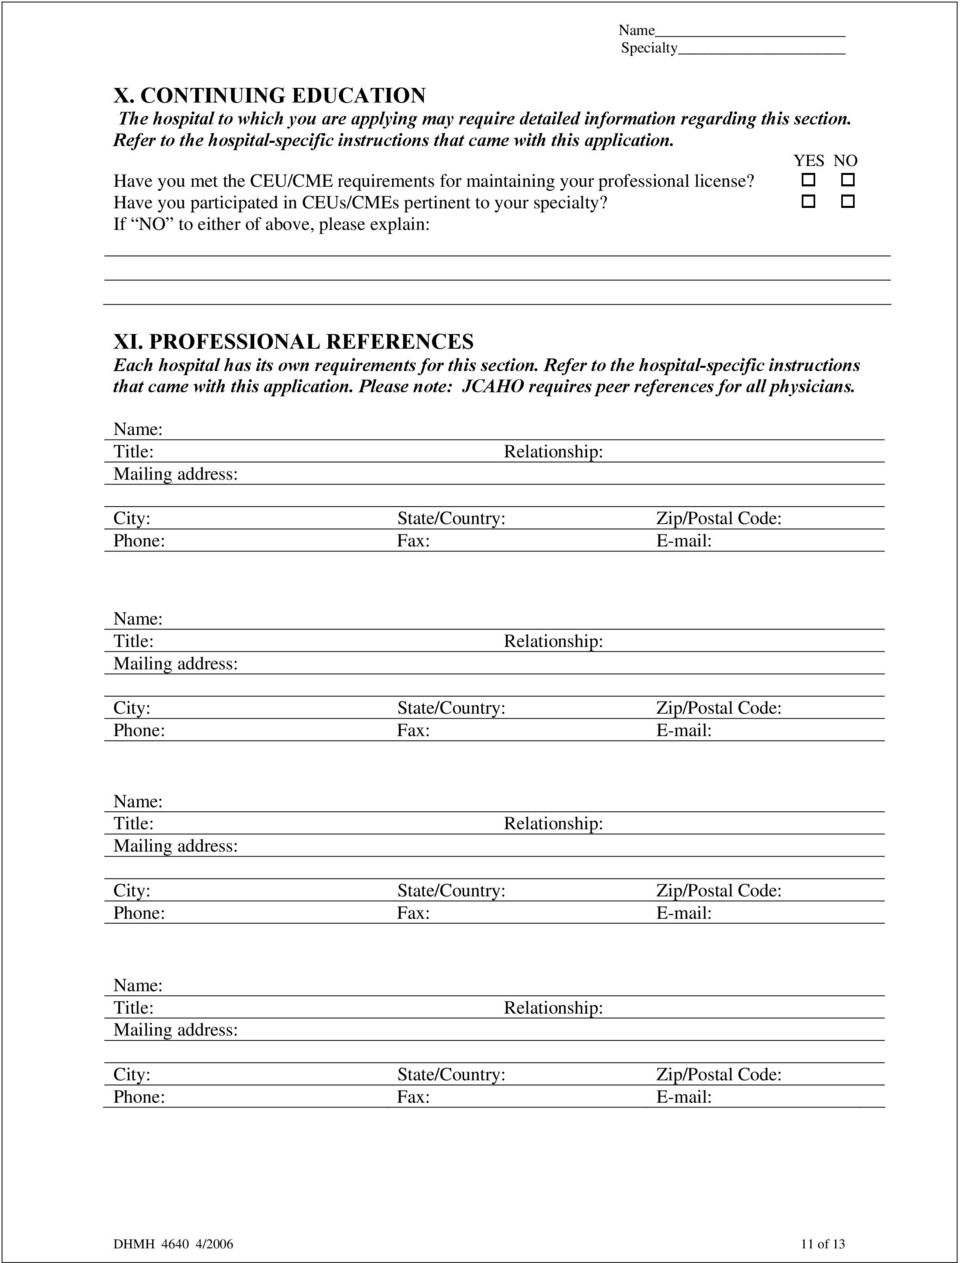 PROFESSIONAL REFERENCES Each hospital has its own requirements for this section. Refer to the hospital-specific instructions that came with this application.